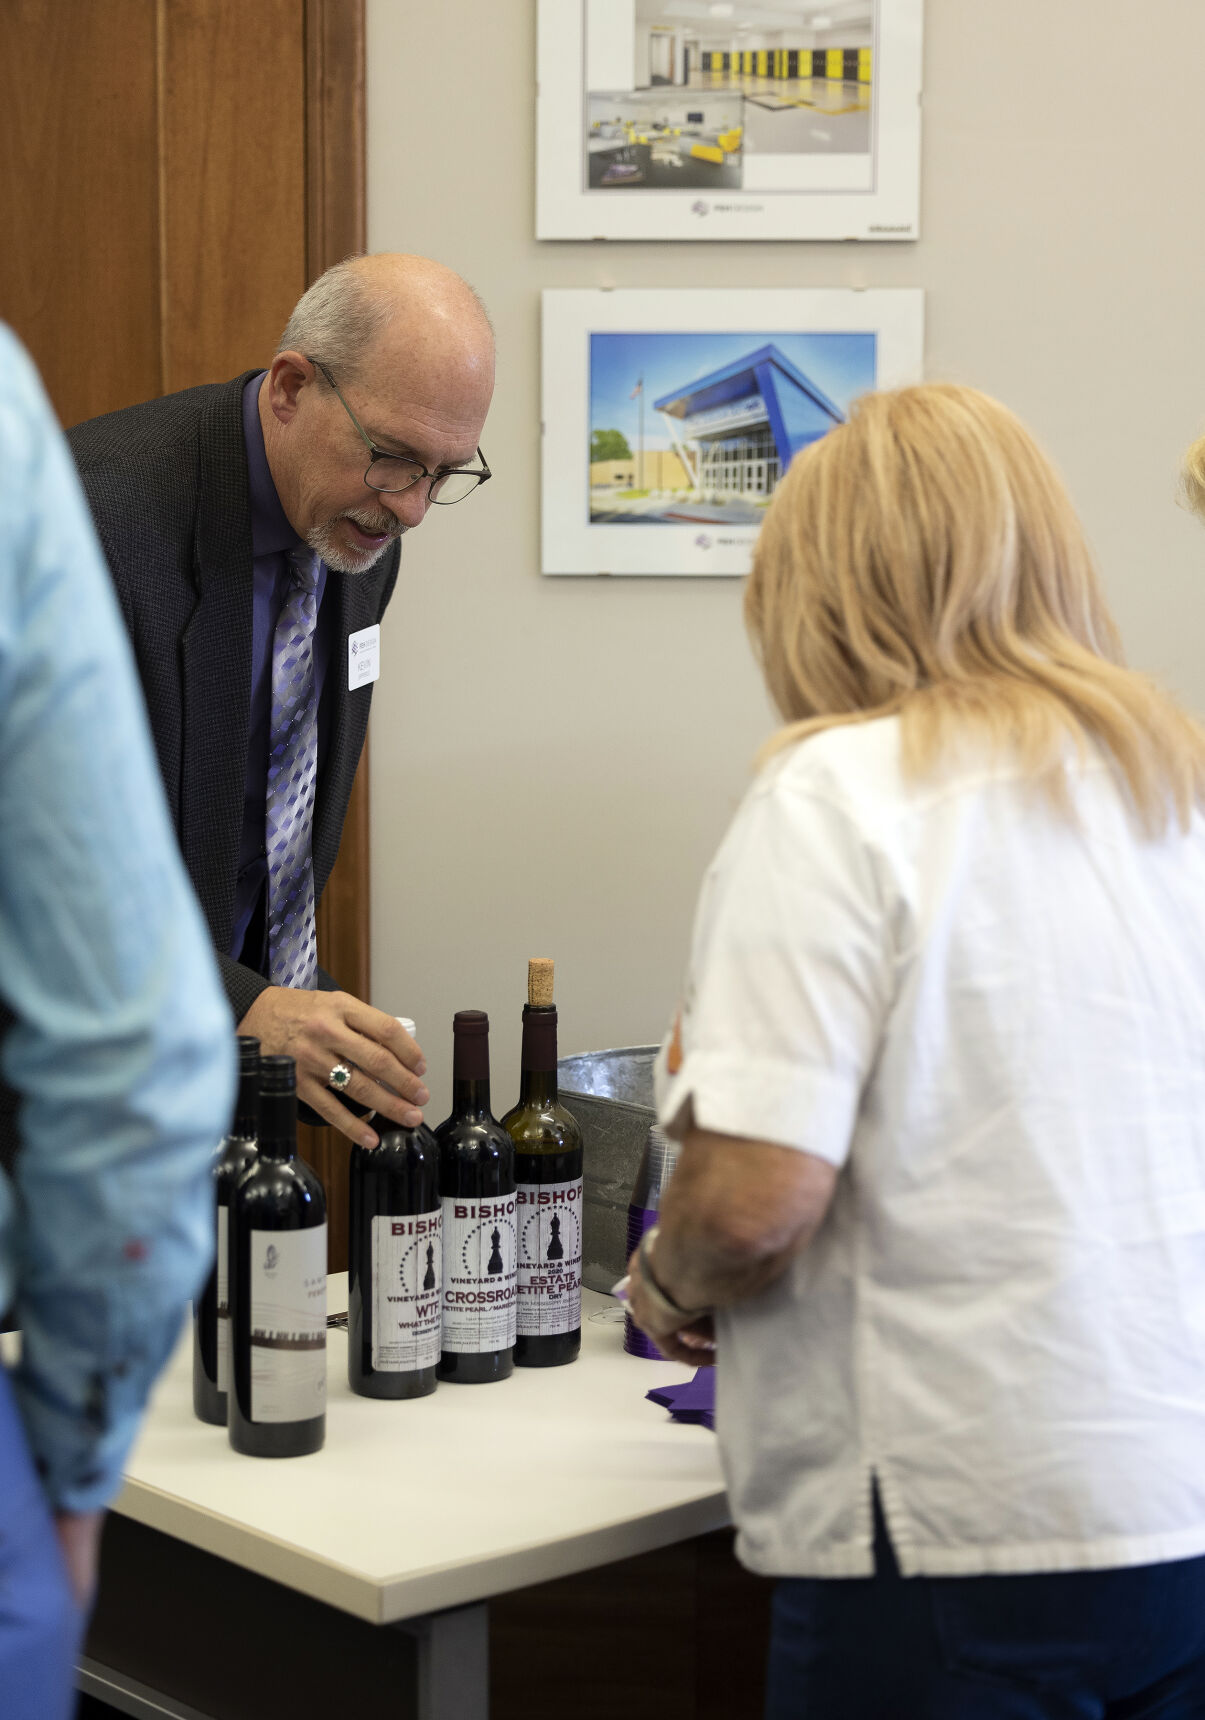 Kevin Eipperle with FEH Design in Dubuque helps with a wine selection.    PHOTO CREDIT: Stephen Gassman